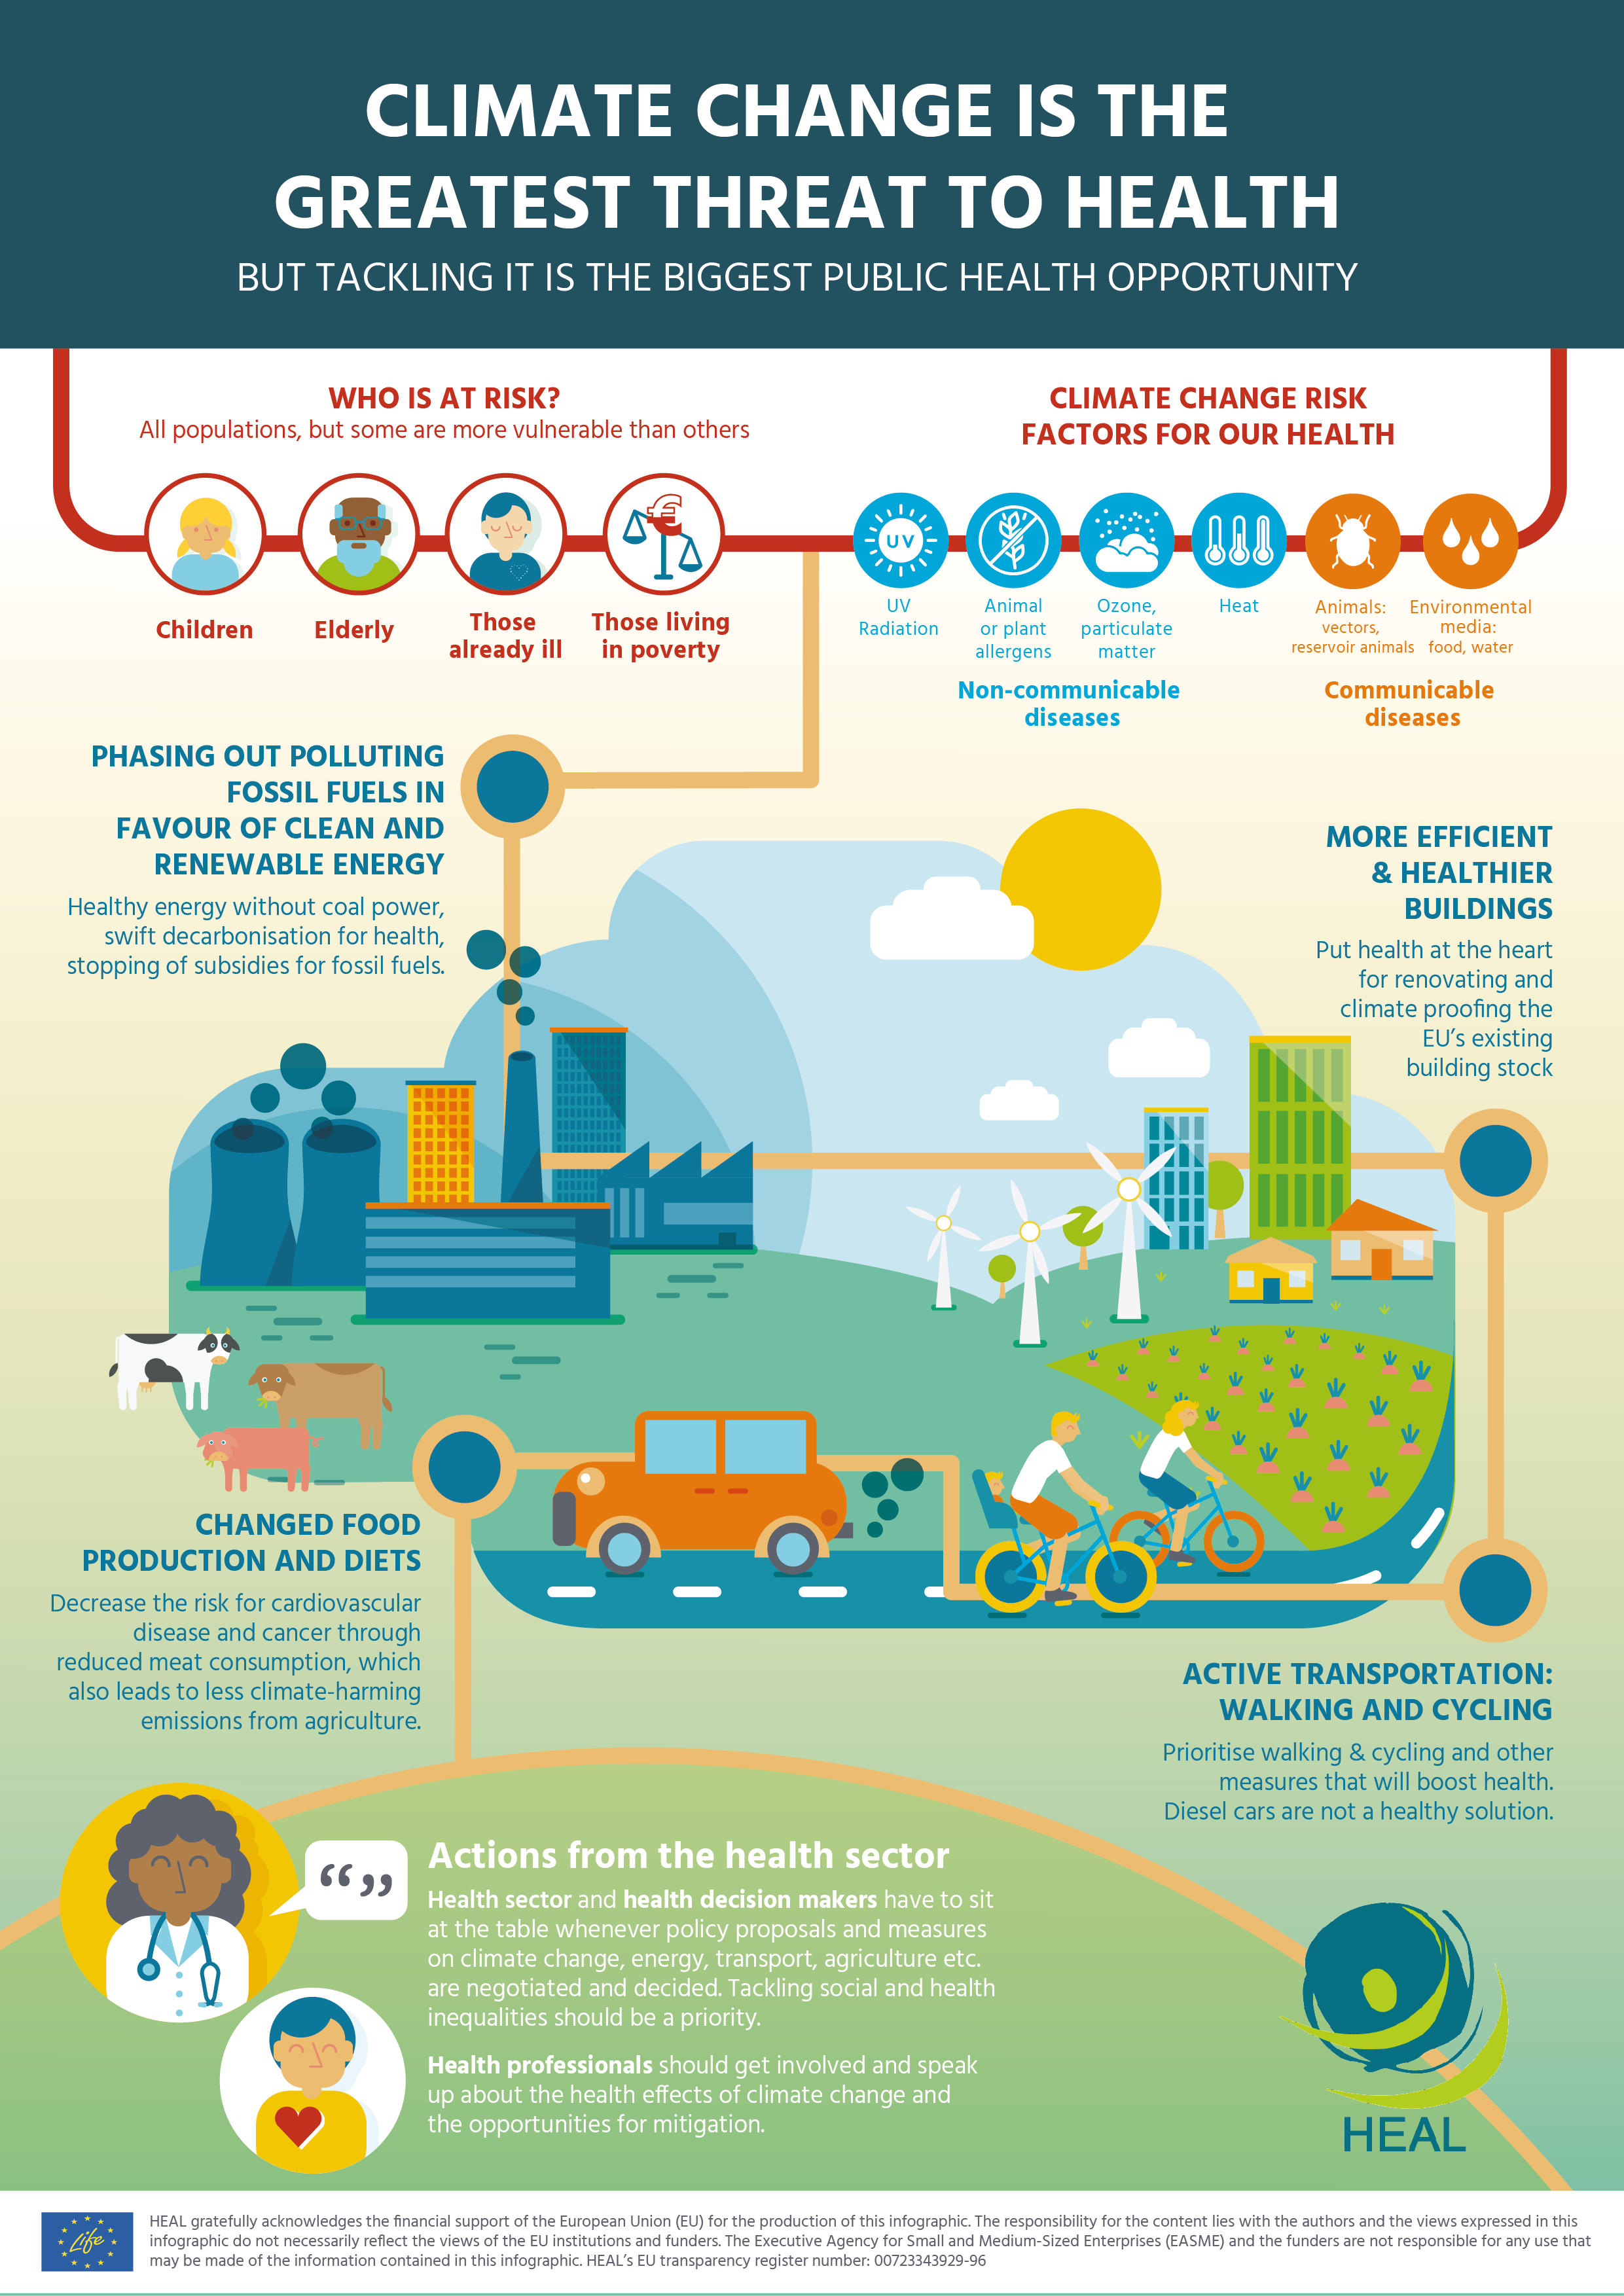 b"Health and Environment Alliance | HEALs climate change infographic - in 5 languages"